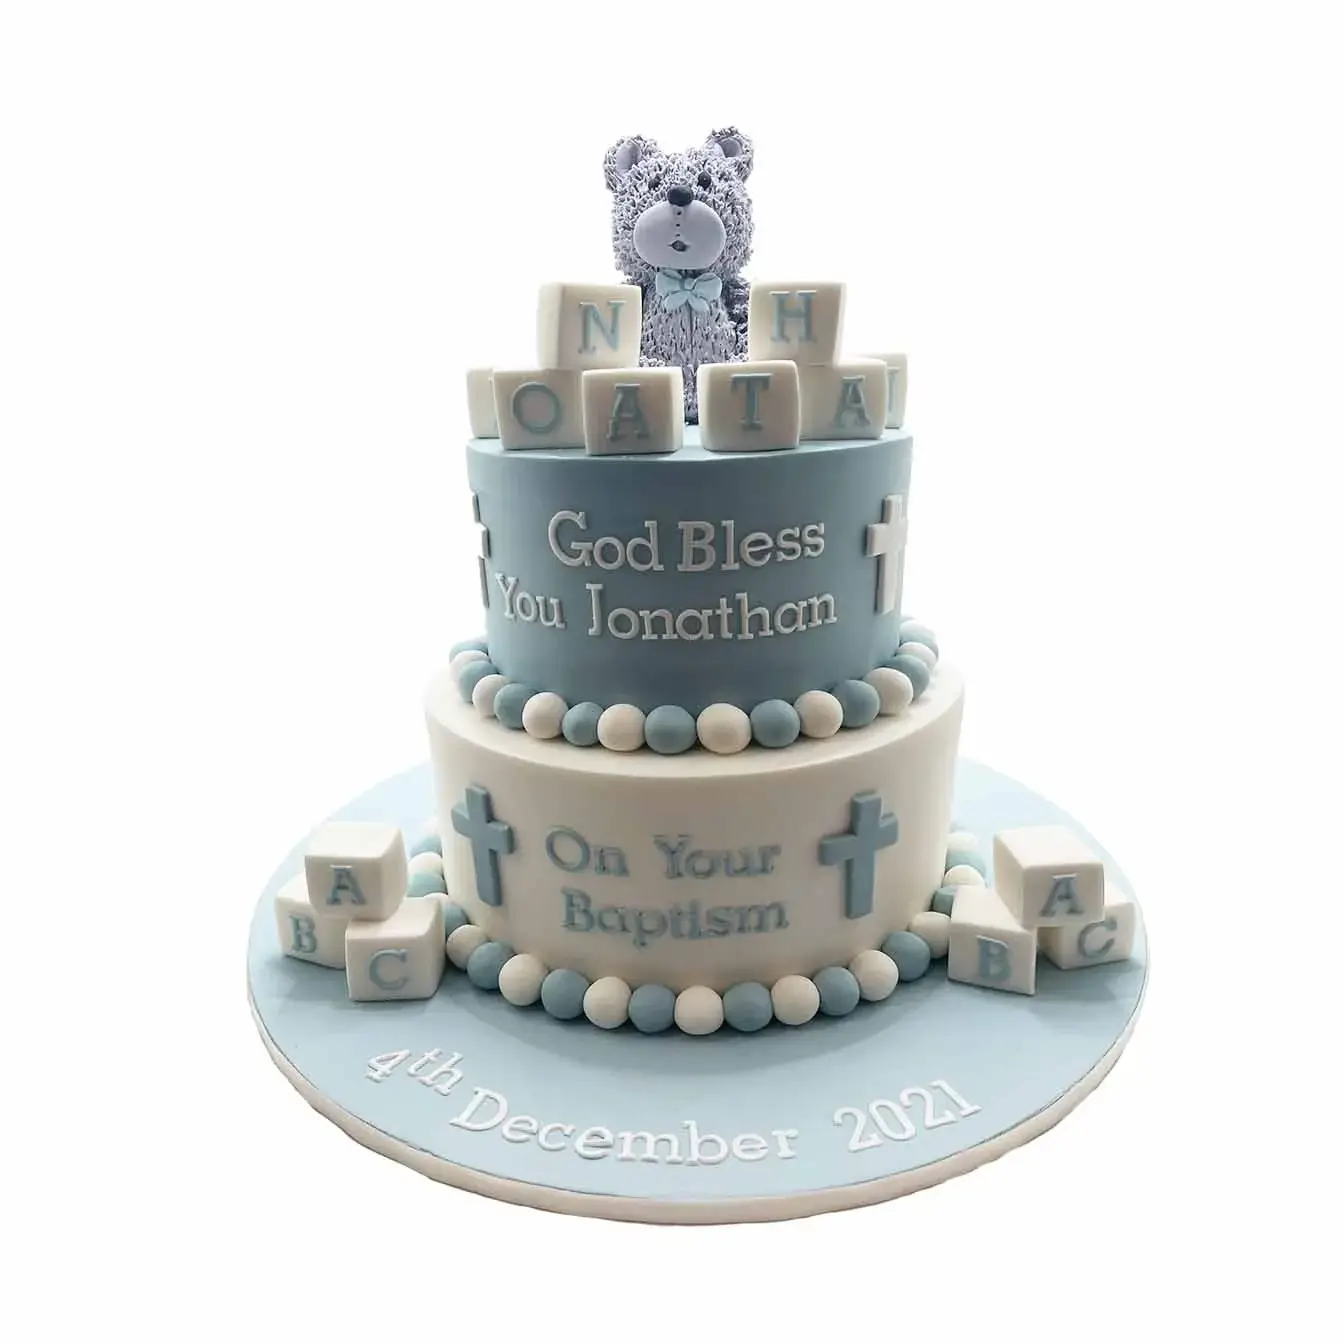 Teddy Bear Blessings Baptism Cake - A two-tier cake adorned with name blocks and a molded teddy bear, a heartfelt centerpiece for baptism and christening celebrations